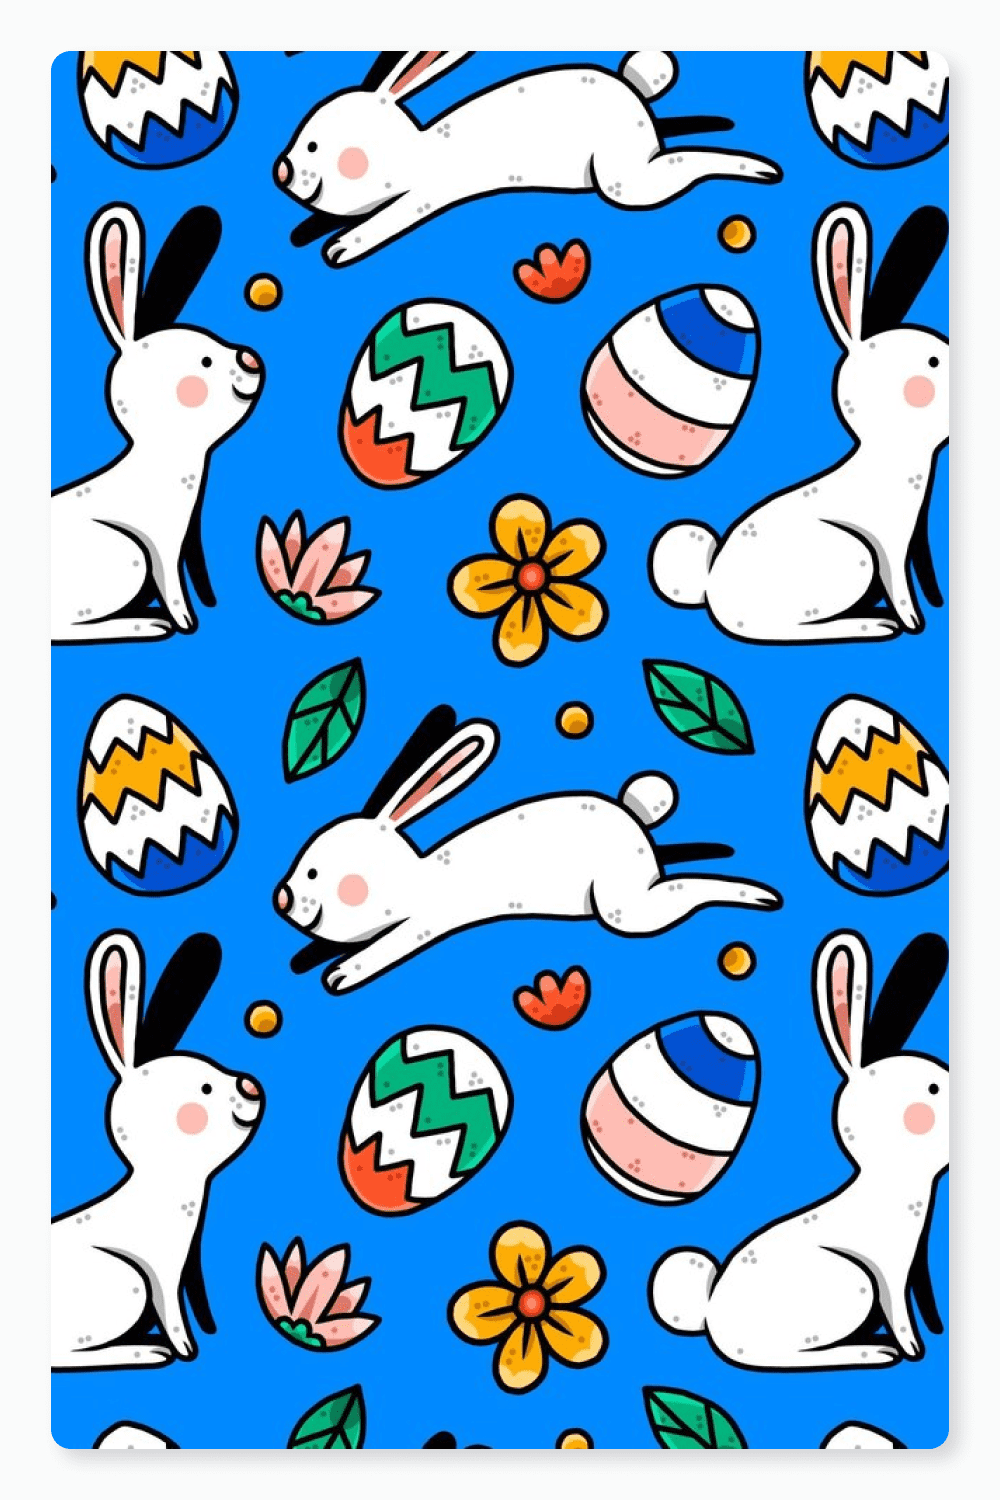 Drawn rabbits, easter eggs and flowers on a blue background.